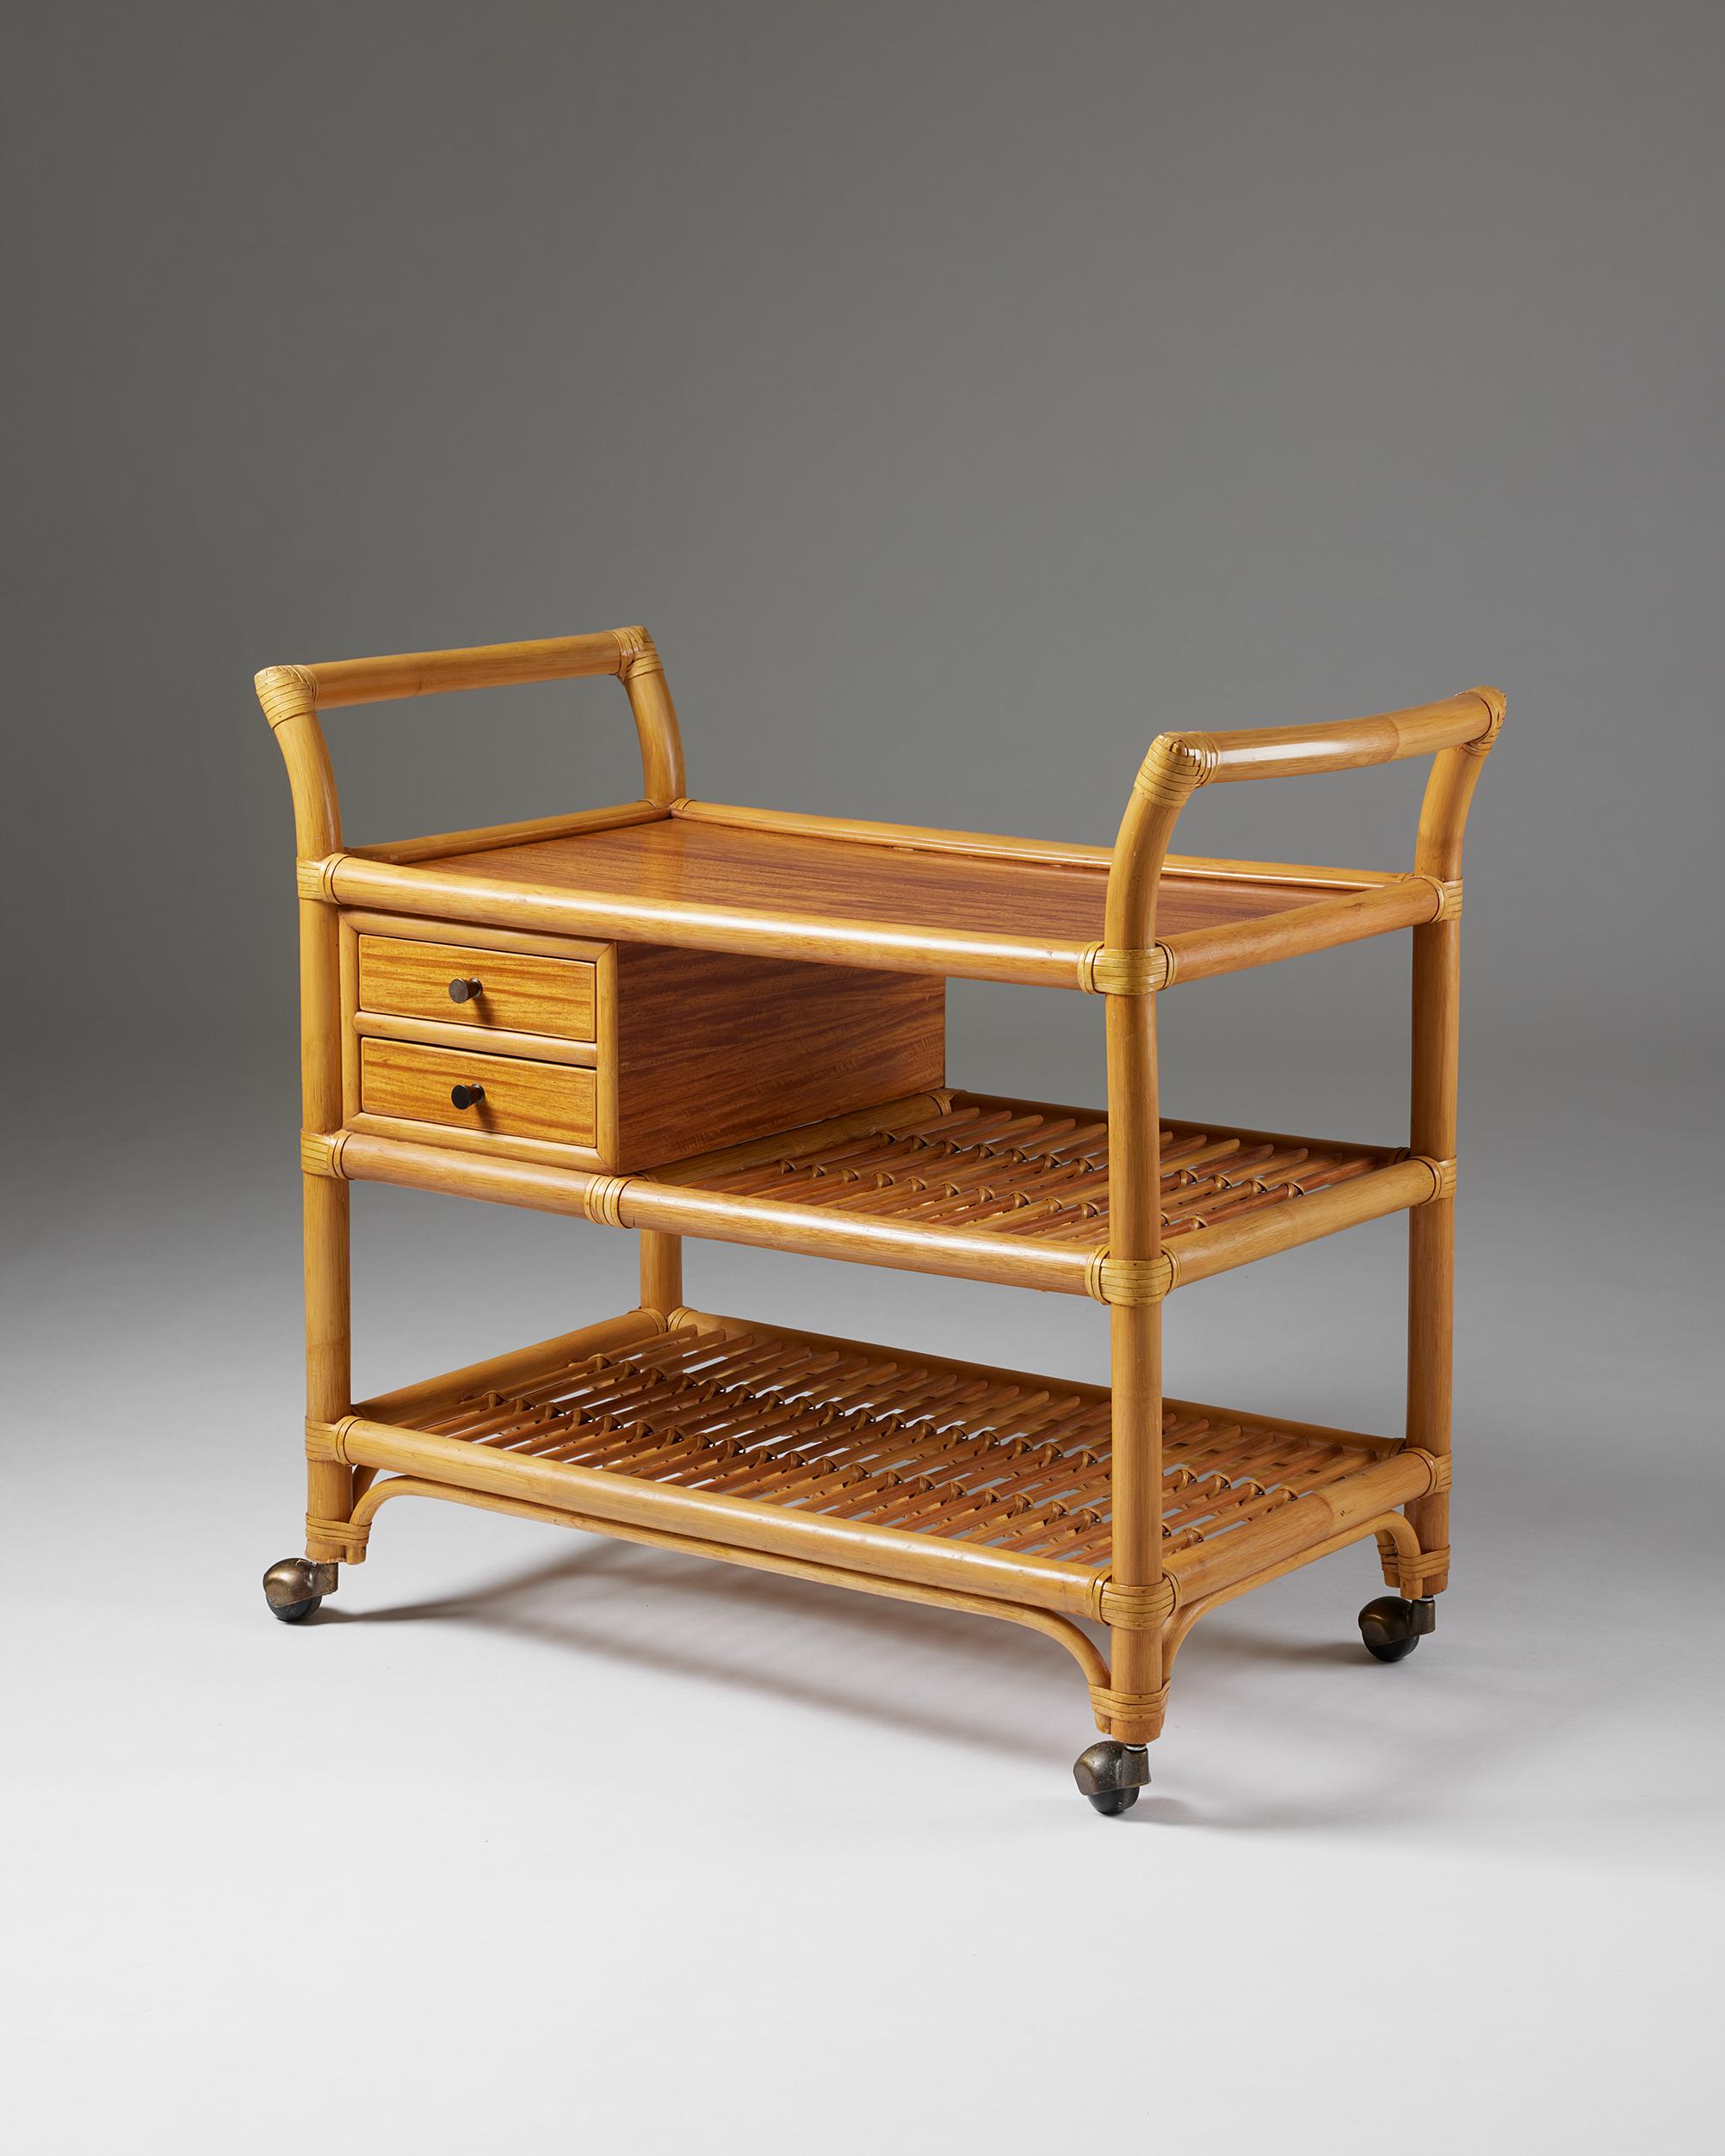 Serving trolley, anonymous, for DUX,
Sweden, 1960s.

Rattan and bamboo.

H: 78 cm
W: 48 cm 
L: 91 cm